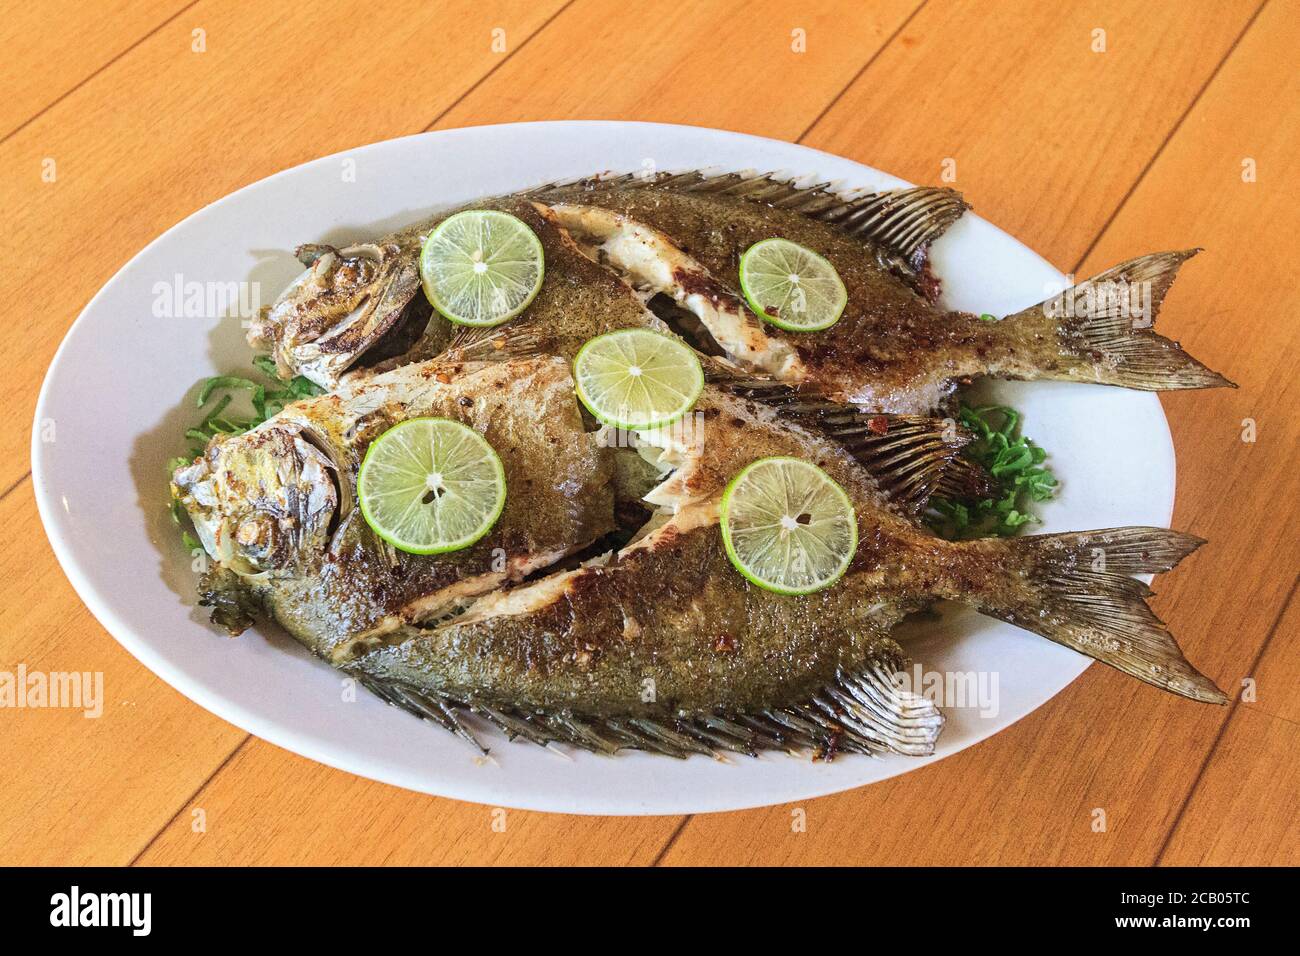 Freshly grilled rabbitfish, known locally in Kosrae, Micronesia as mulap. Stock Photo